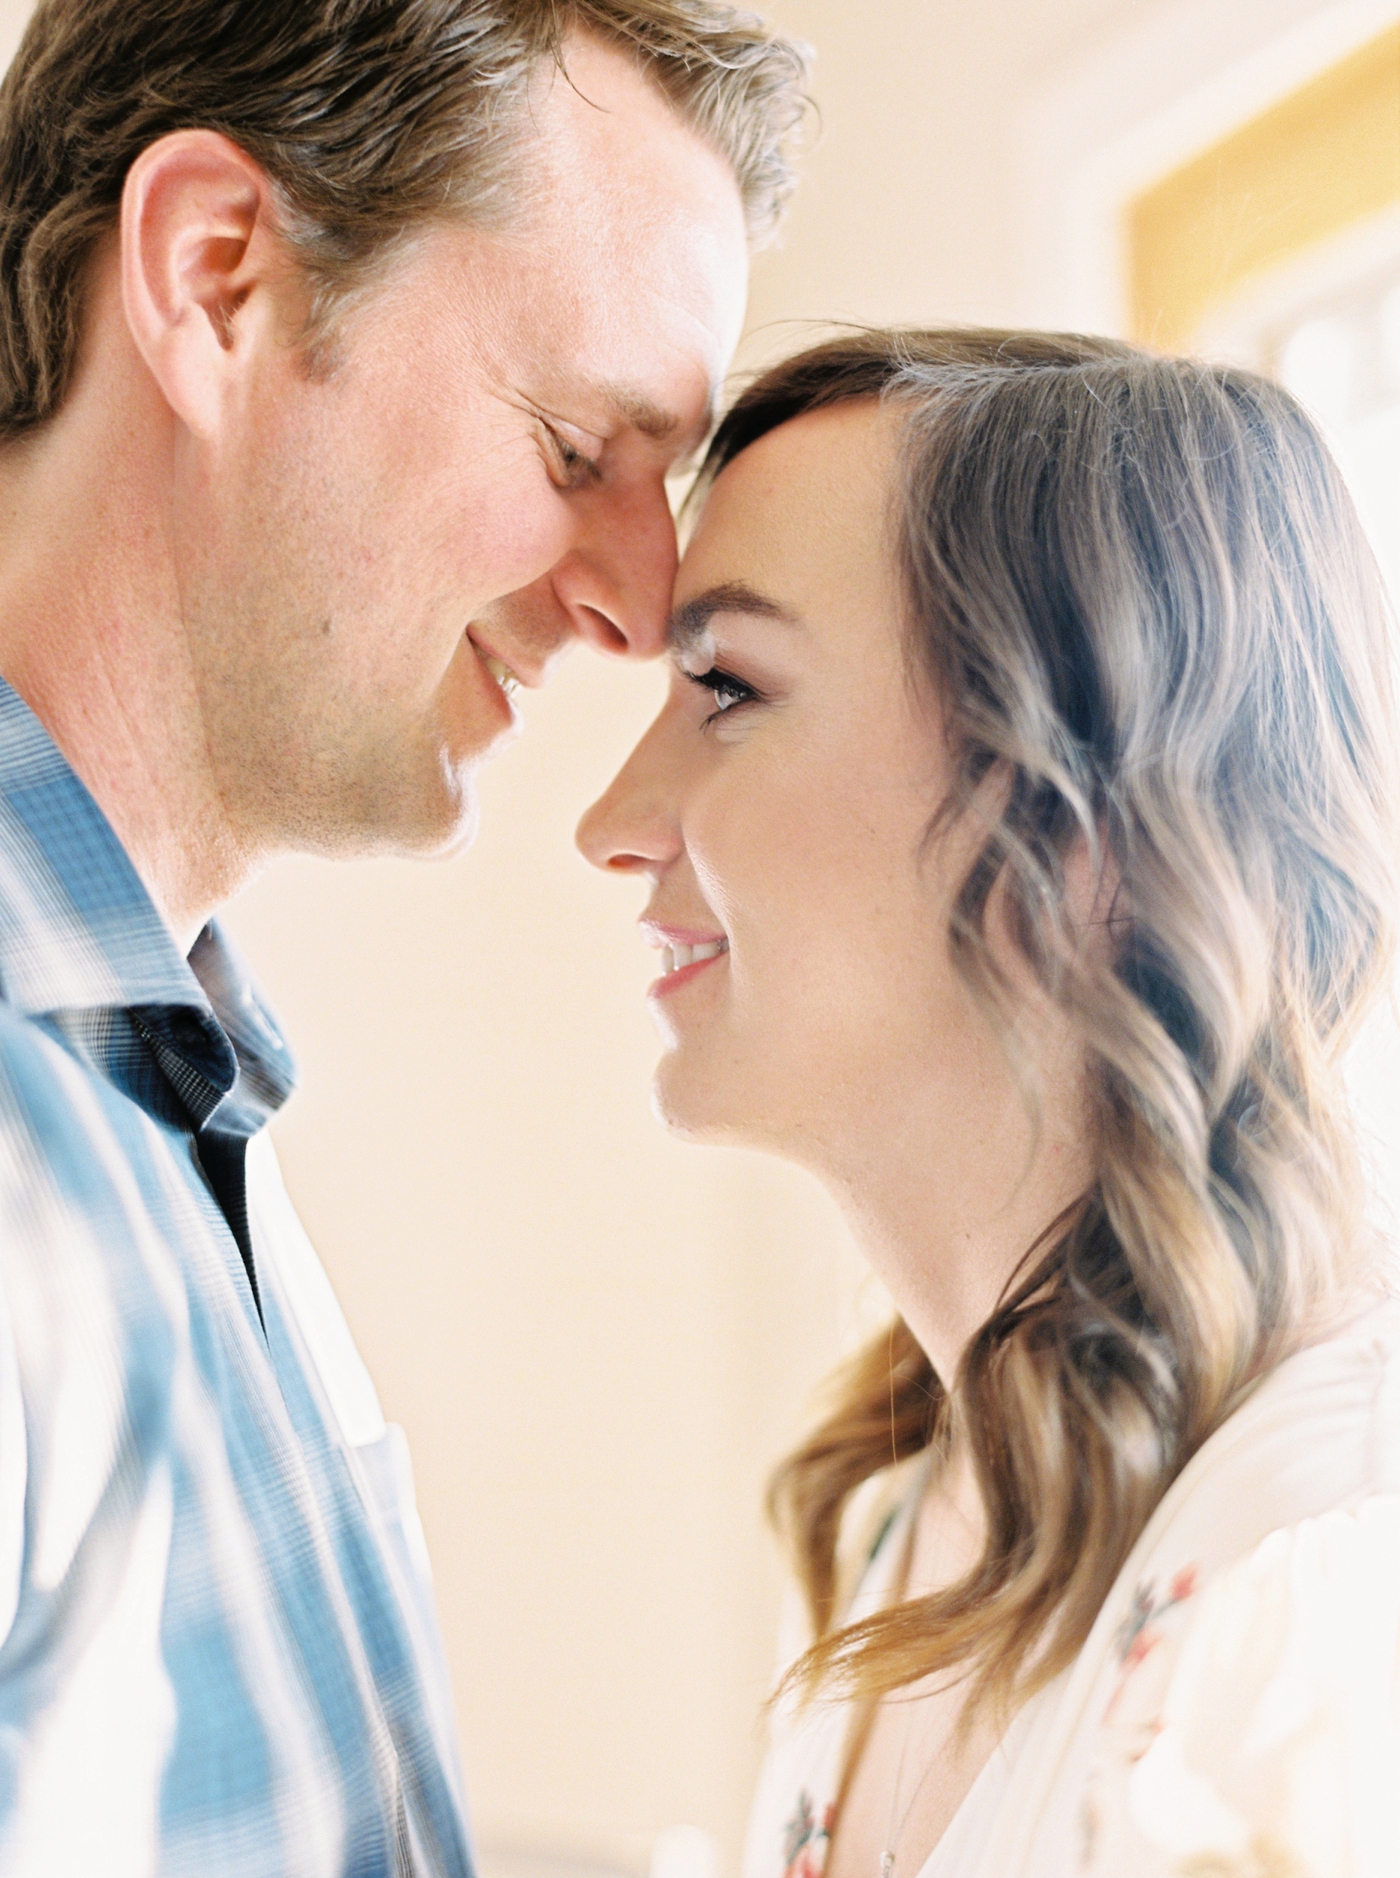 in home lifestyle session | calgary wedding photographers | justine milton photography